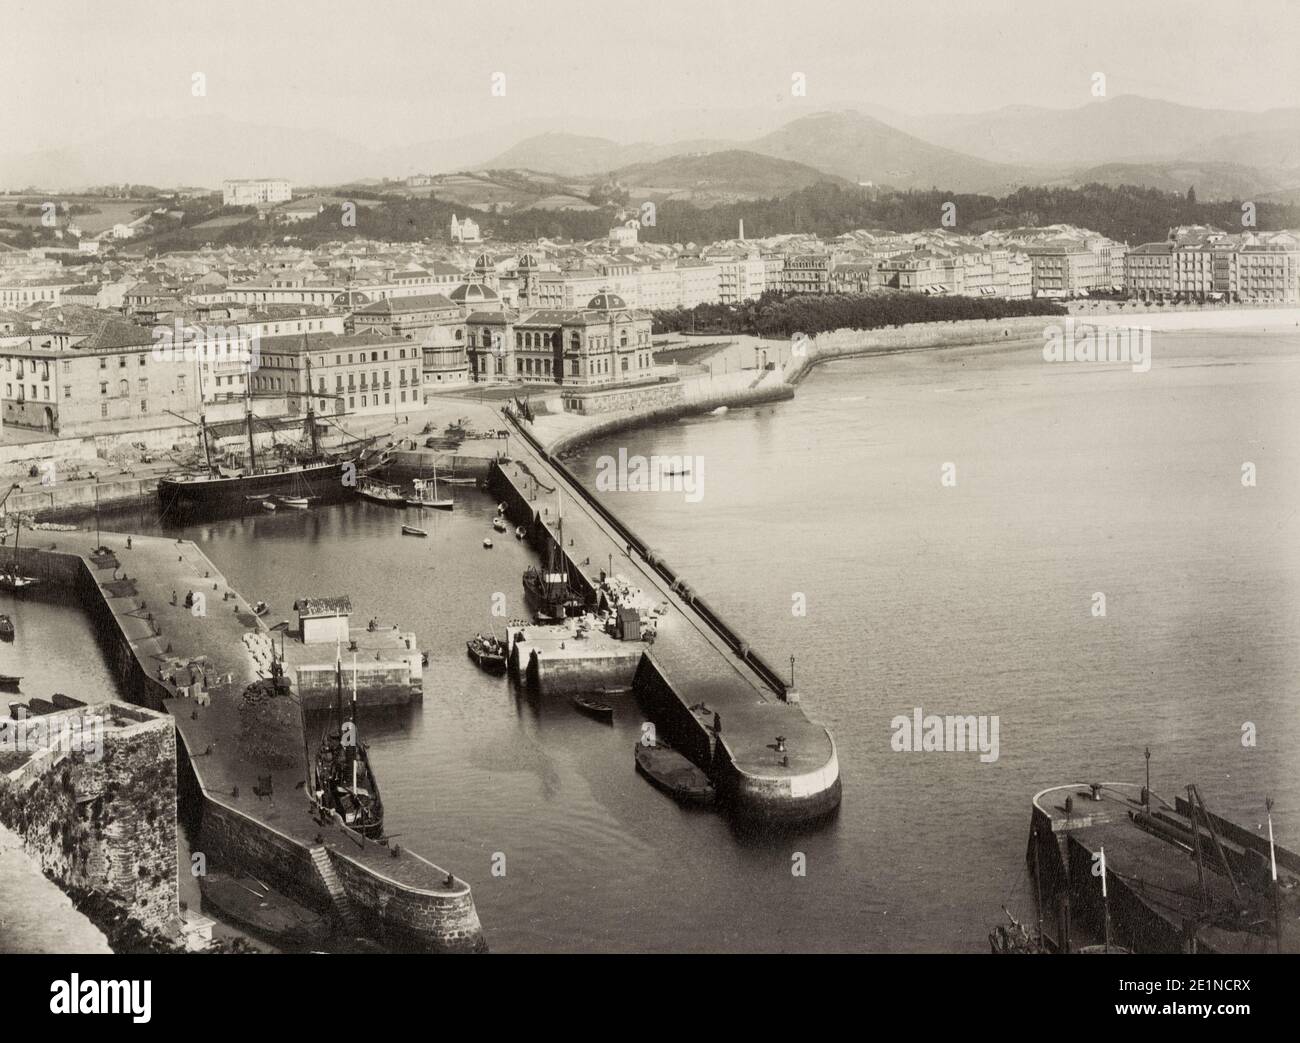 19th century vintage photograph: harbour wall at San Sebastián or Donostia, a coastal city and municipality located in the Basque Autonomous Community, Spain. It lies on the coast of the Bay of Biscay, 20 km (12 miles) from the French border. Stock Photo